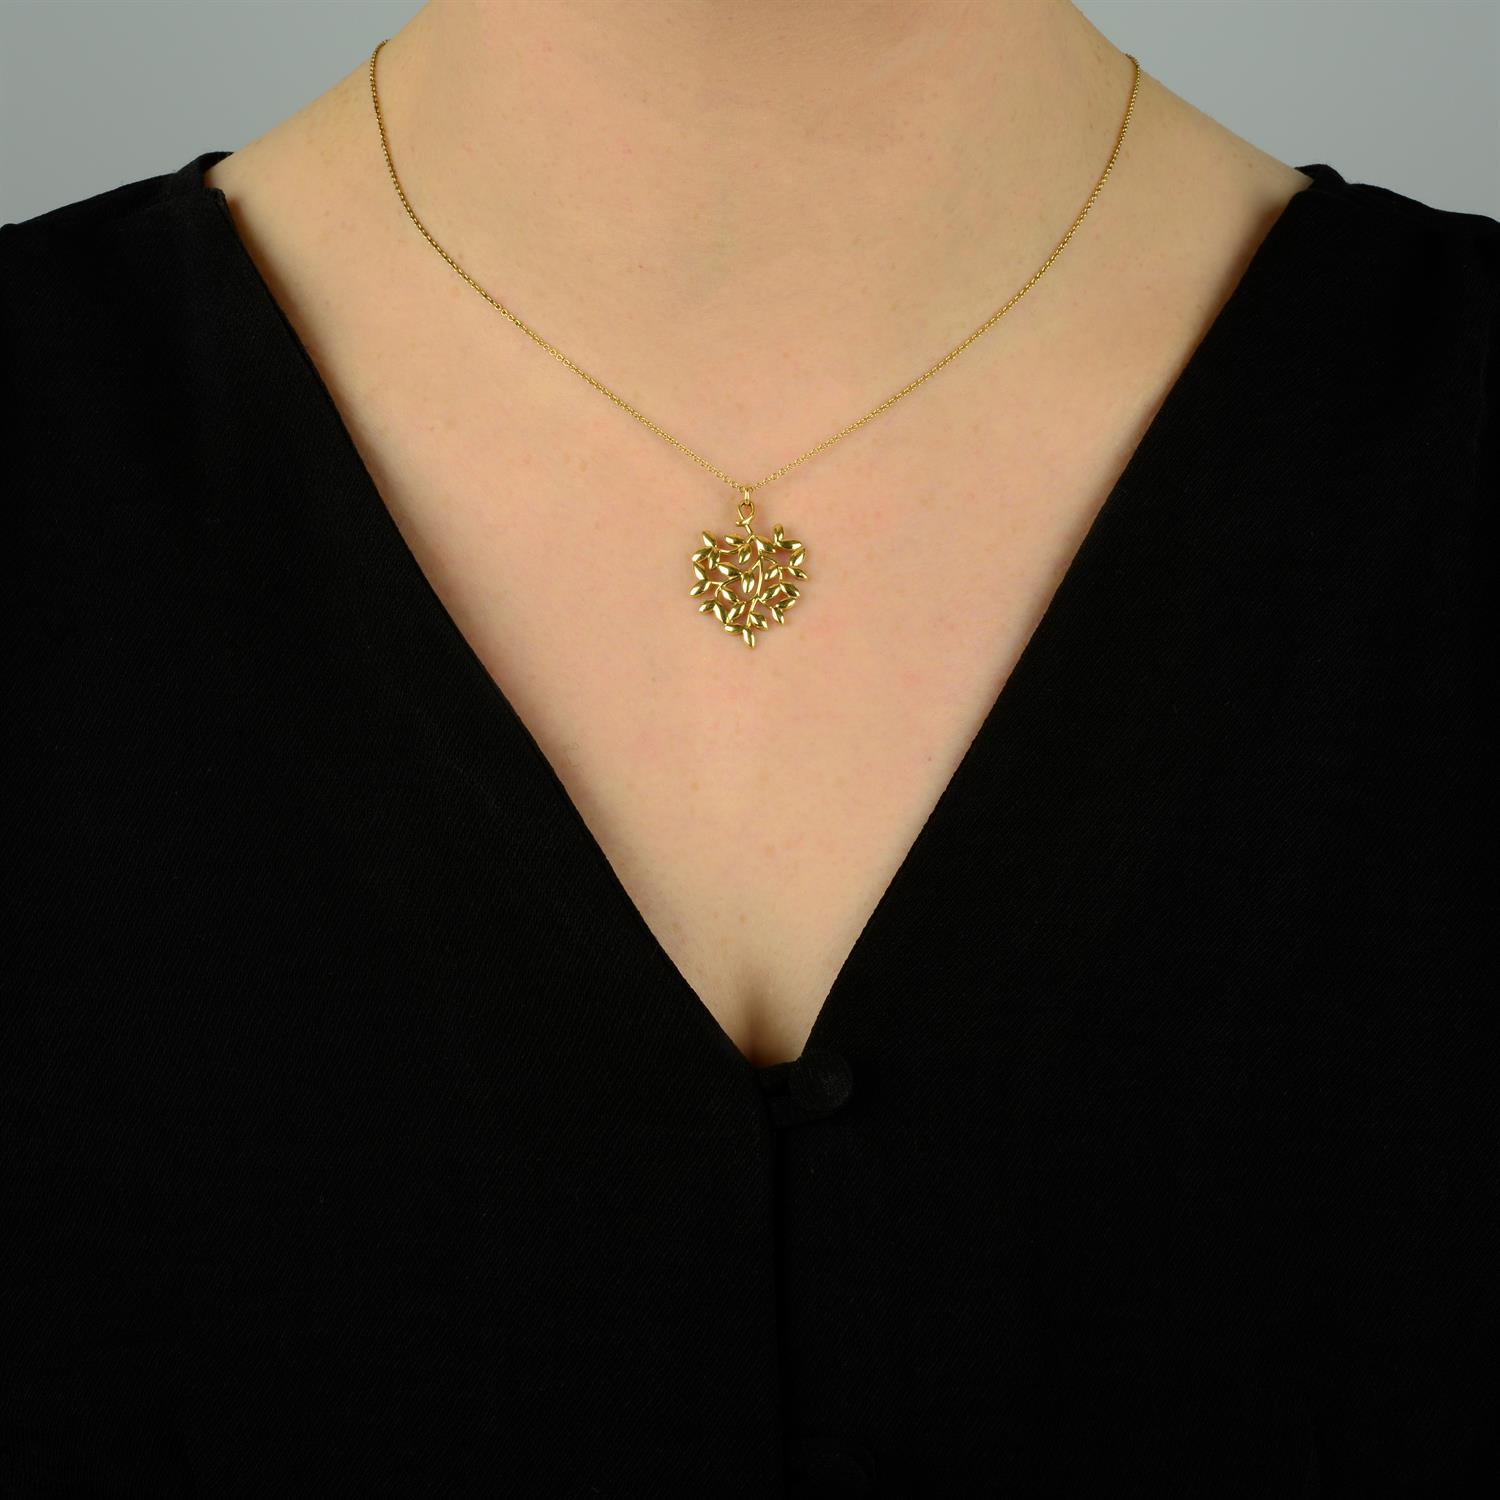 An 'Olive Leaf' pendant on chain, by Paloma Picasso for Tiffany & Co. - Bild 5 aus 5